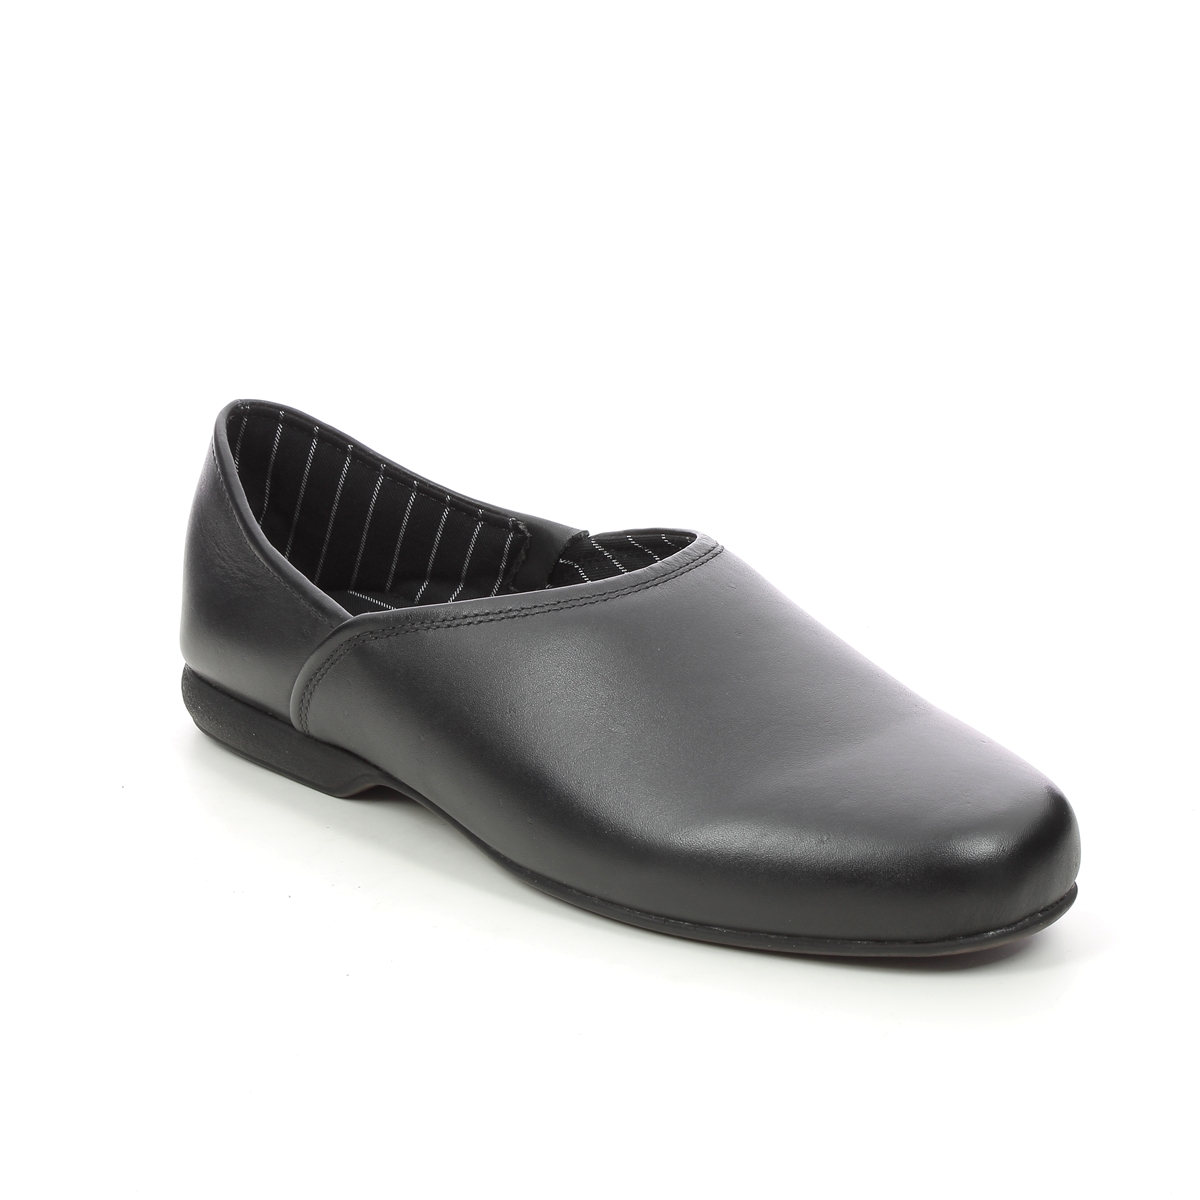 Clarks Harston Elite Black Leather Mens Slippers 447207G In Size 8 In Plain Black Leather G Width Fitting